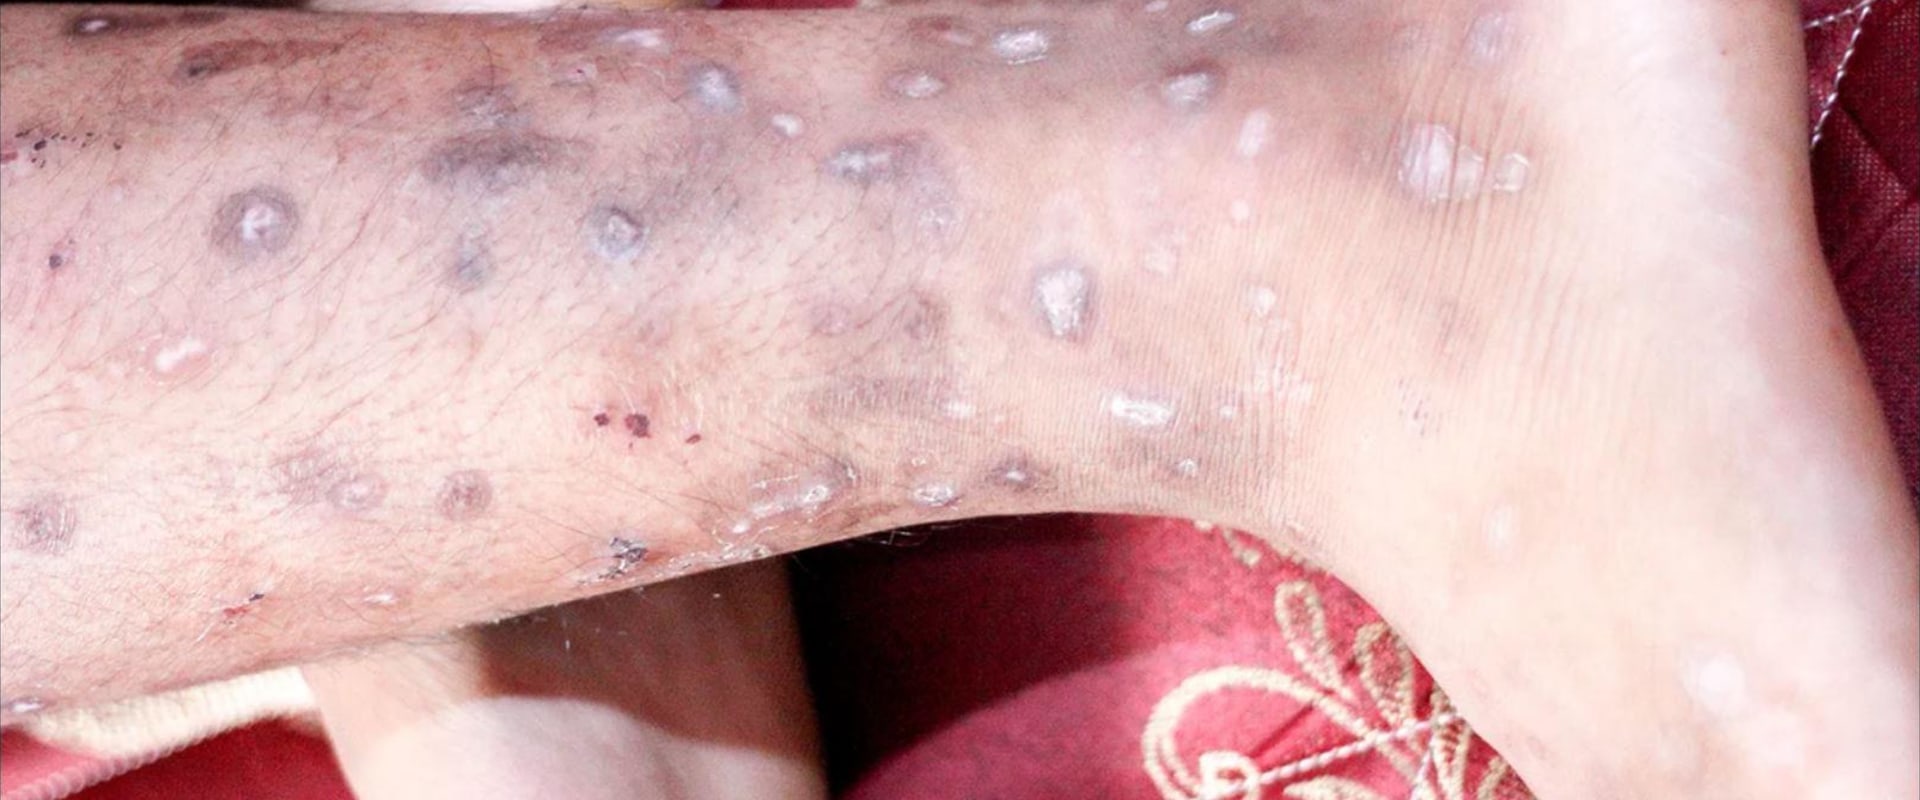 Understanding Skin Infections and How to Treat Them